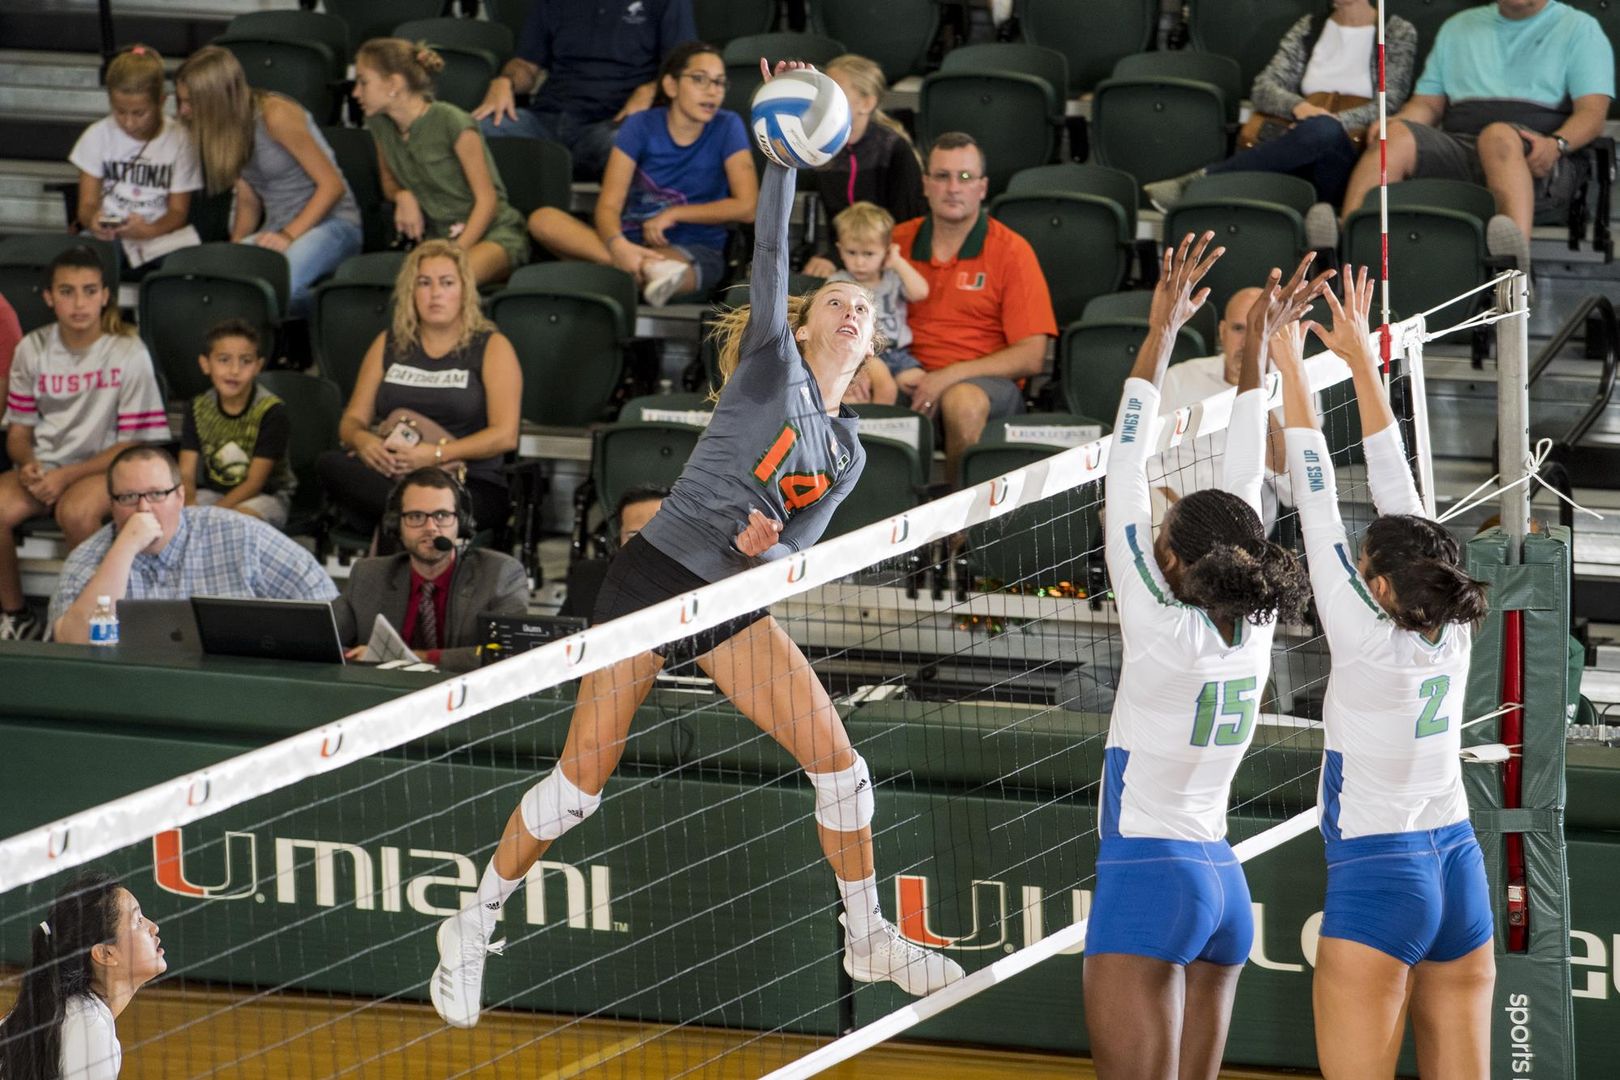 Canes Volleyball Sweeps Wake Forest 3-0, in ACC Opener